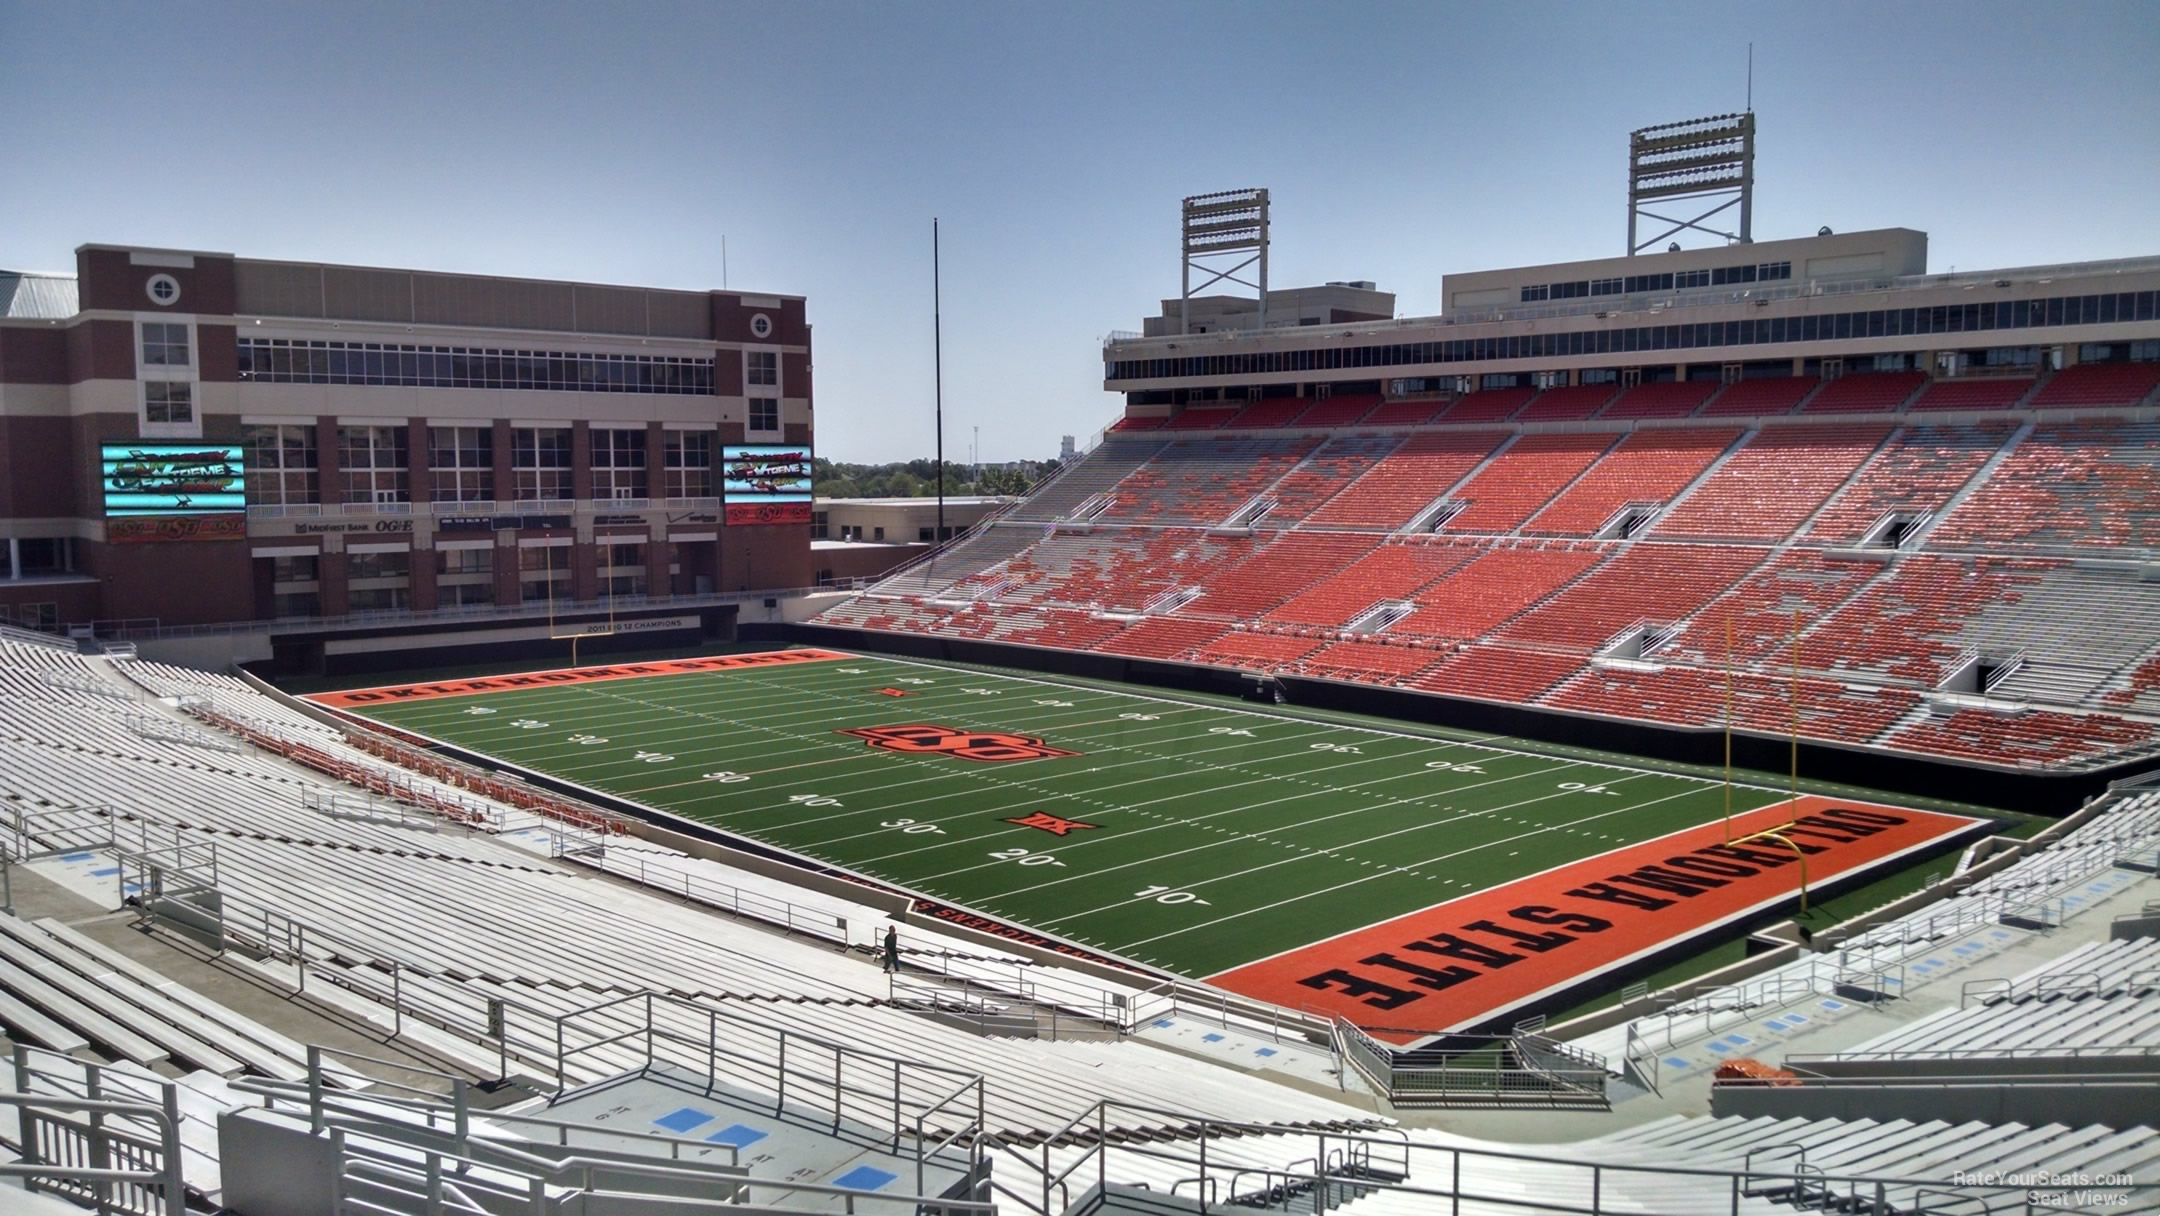 section 326, row 19 seat view  - boone pickens stadium